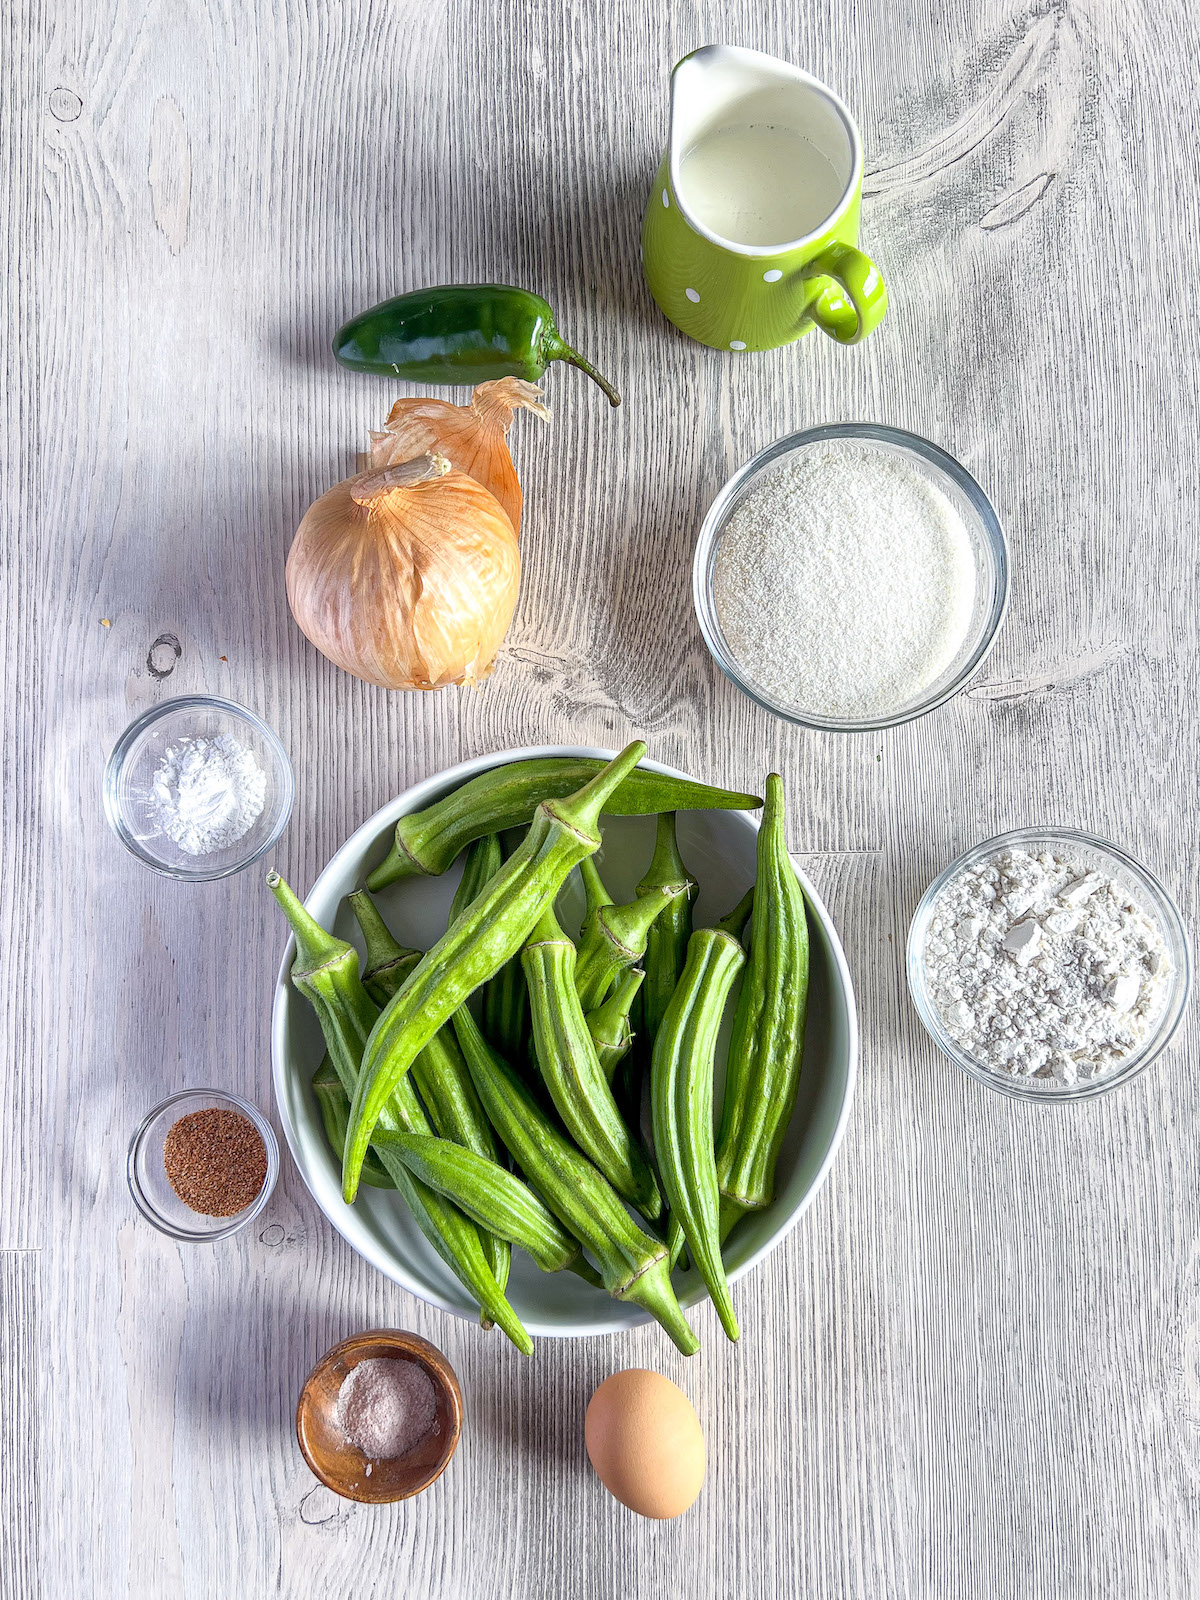 Ingredients for okra fritters in small bowls.